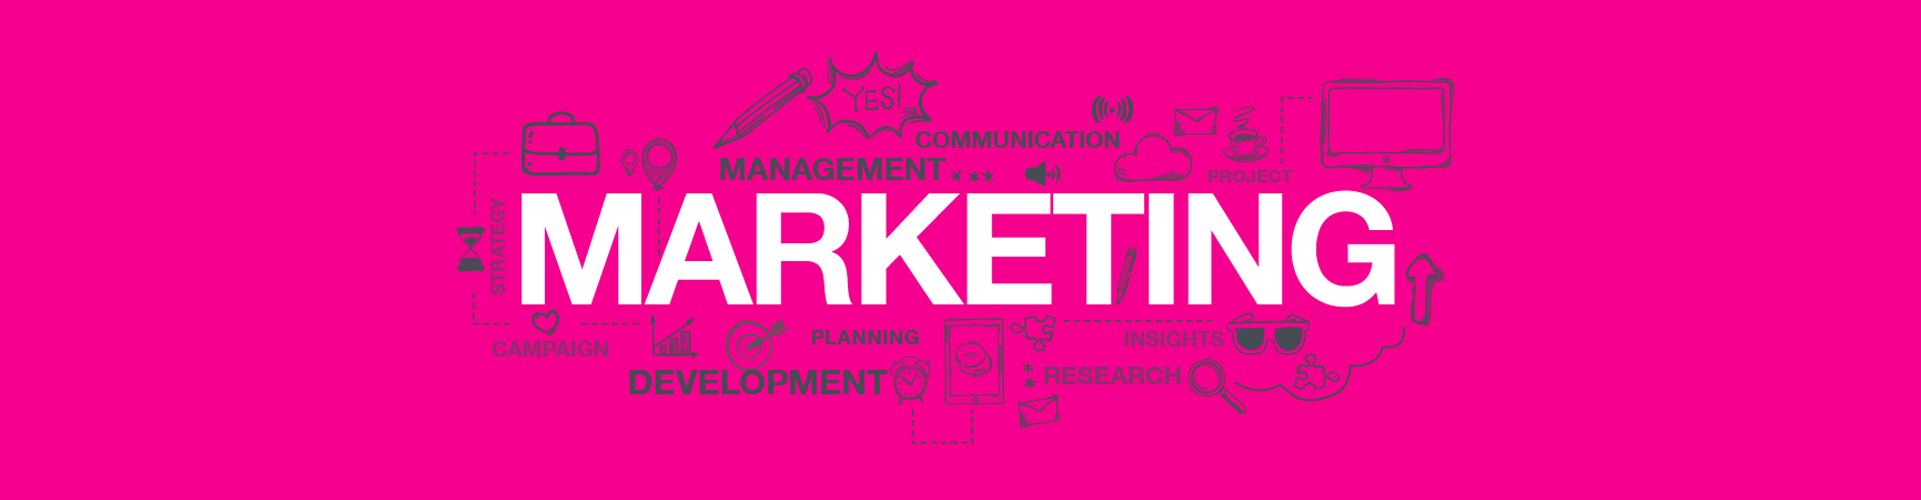 A Pink visual with Marketing as the title. There are some words and icons surrounding the title that refer to the subject.